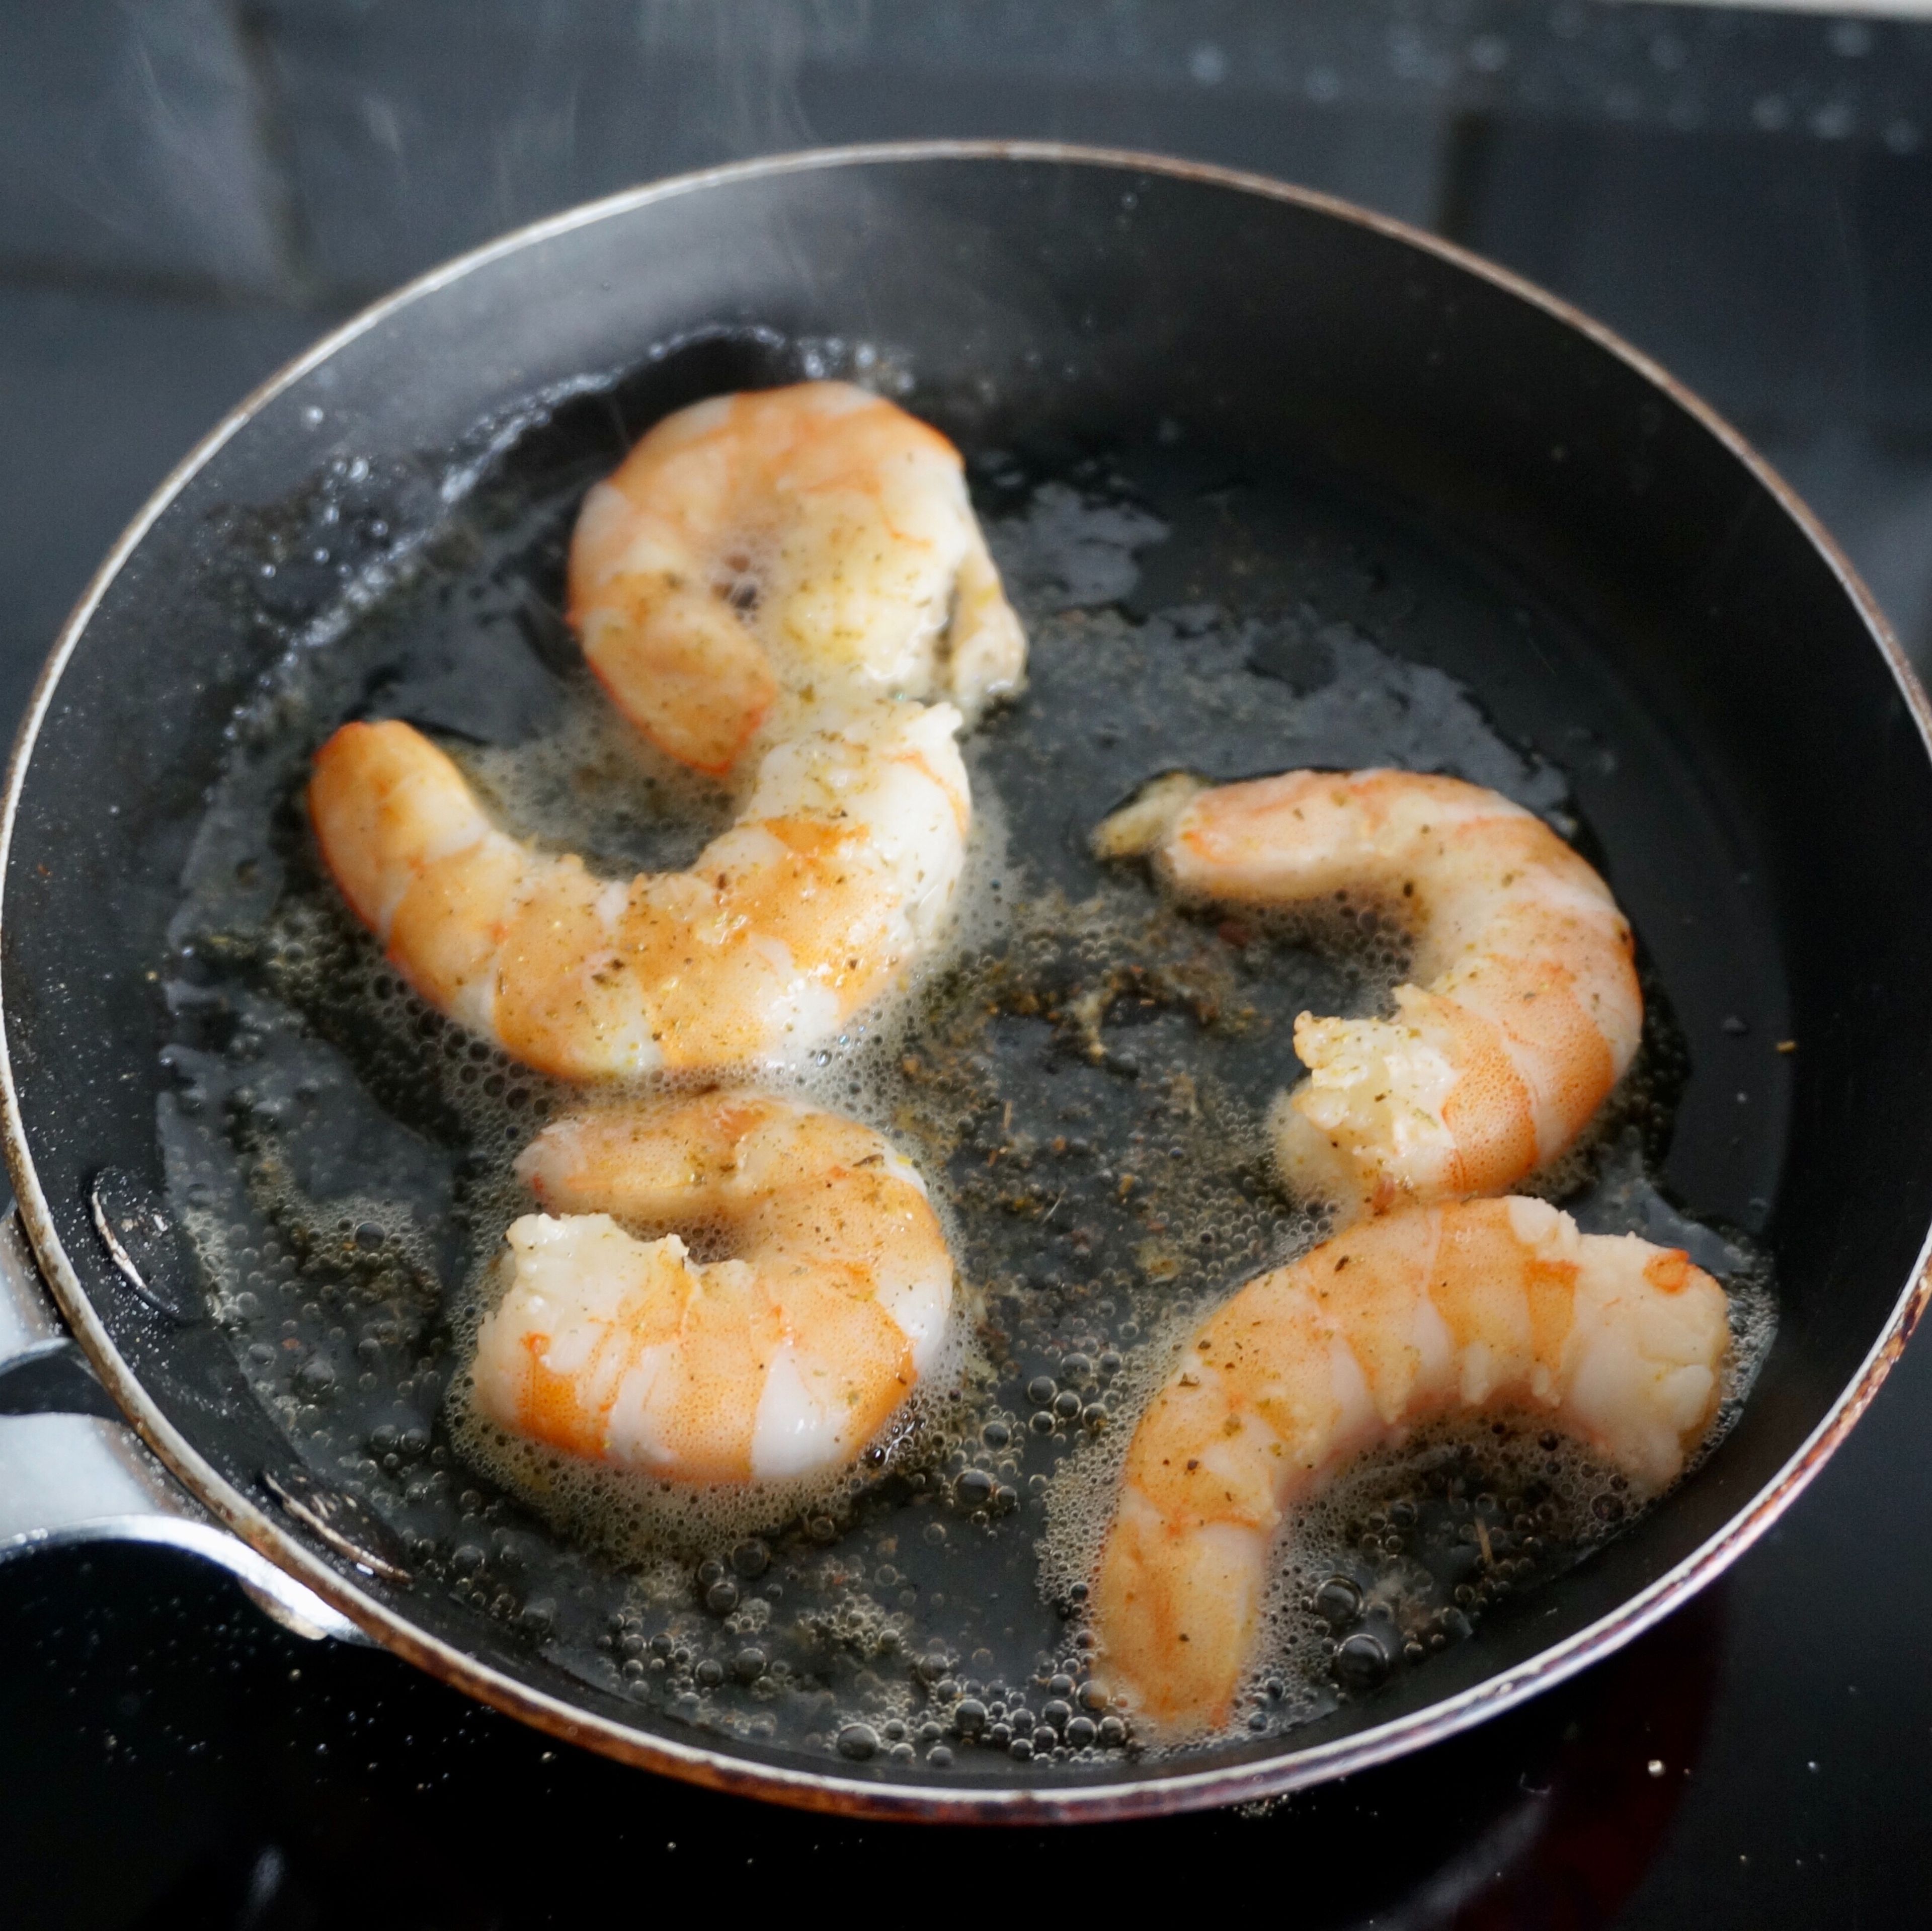 Peel the shrimps. Pour olive oil into a preheated pan, fry the shrimps on both sides, season with salt and sprinkle them with Provencal herbs. Fry for 2-3 minutes, until the shrimp are ready.